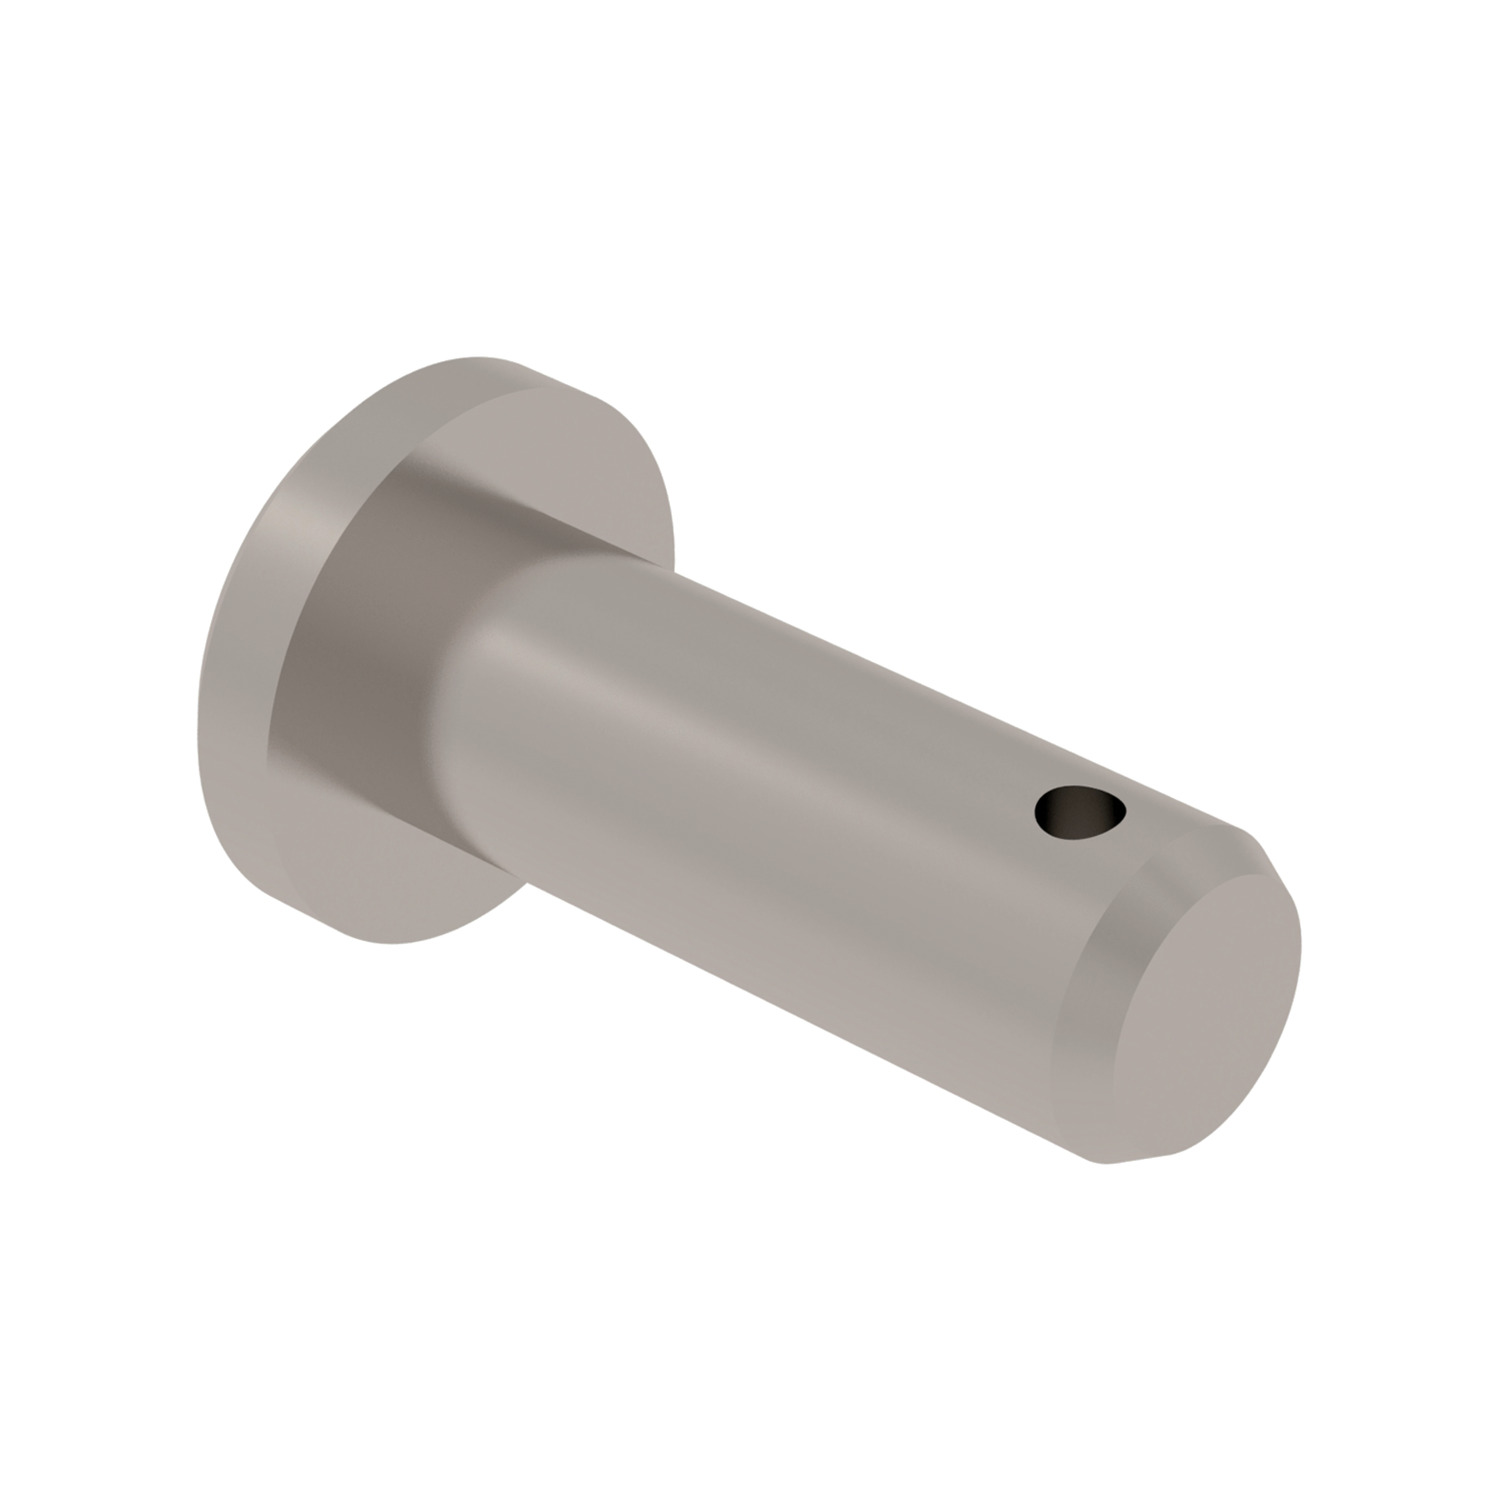 Clevis Pins Steel clevis pin with hole, for use with our clevis joints. Split cotter pins and washers are also available for a full assembly.